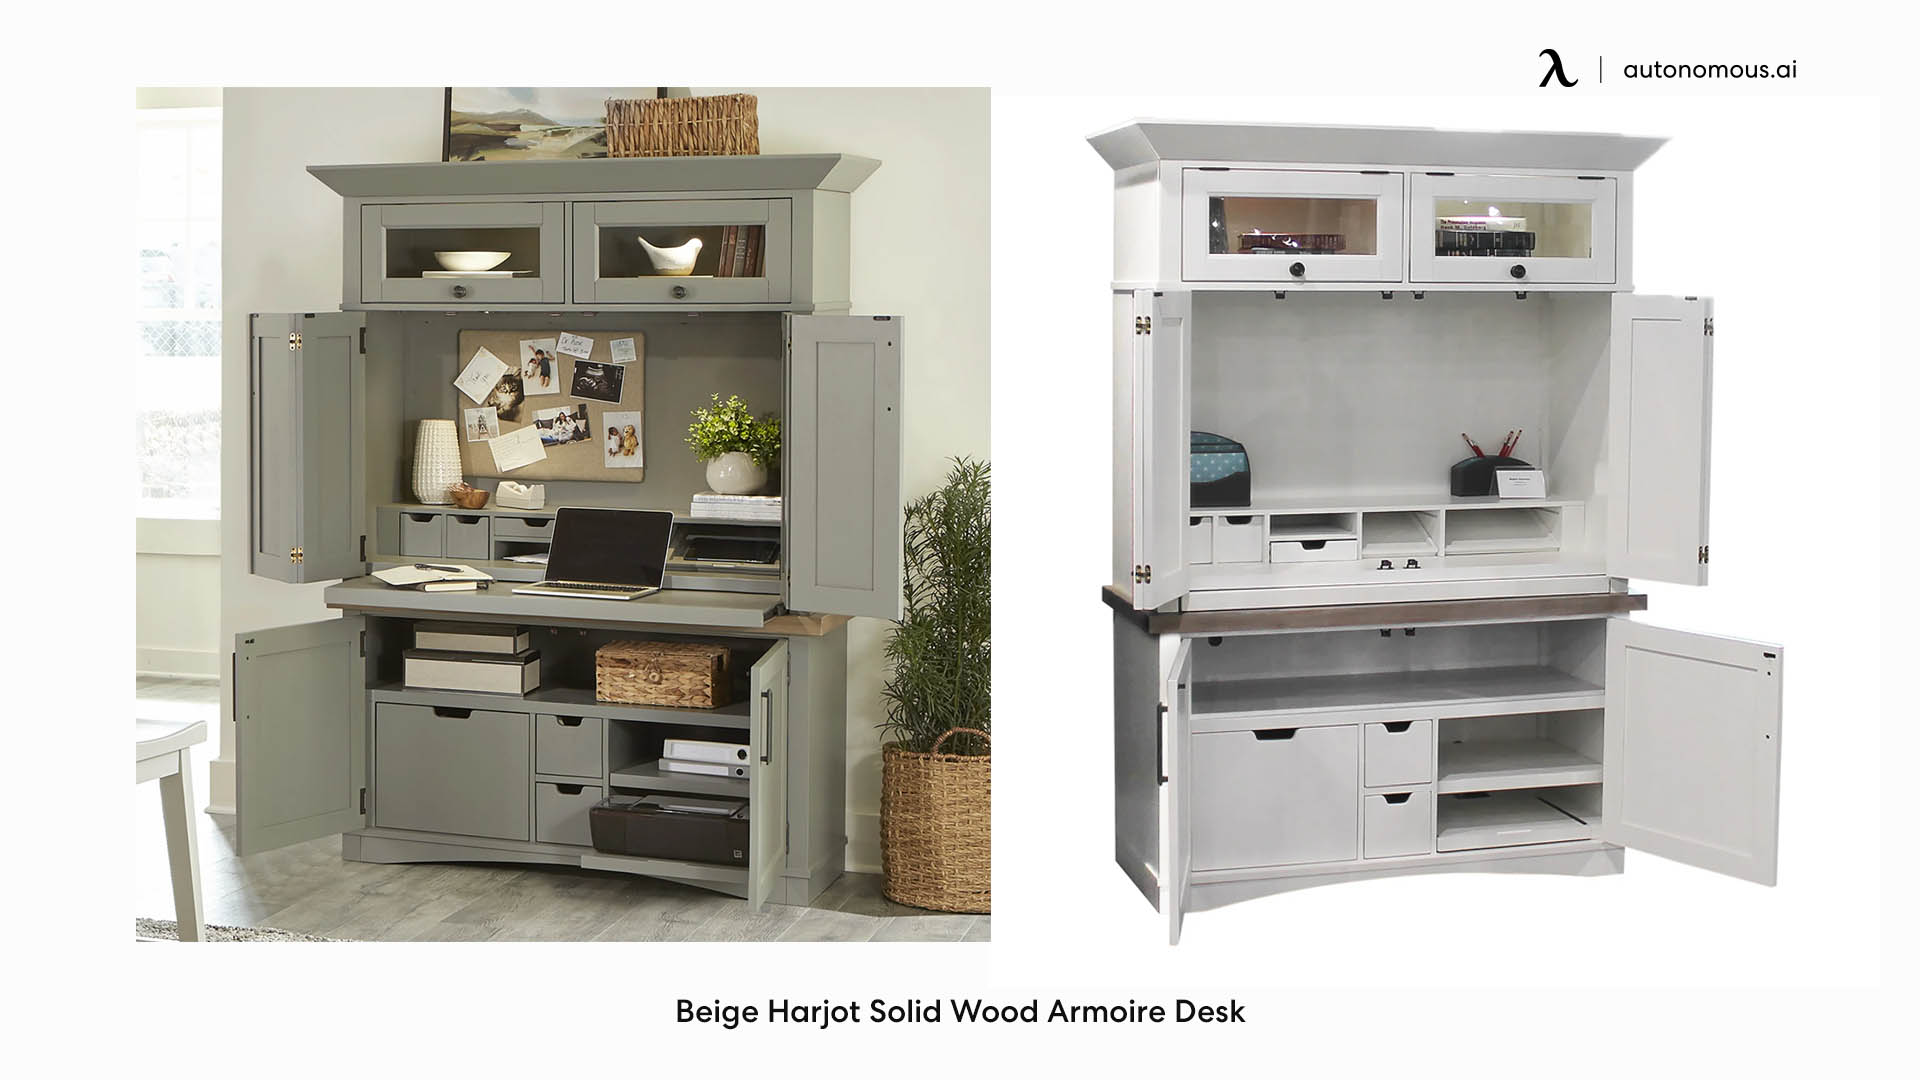 Armoire desks are both useful and stylish